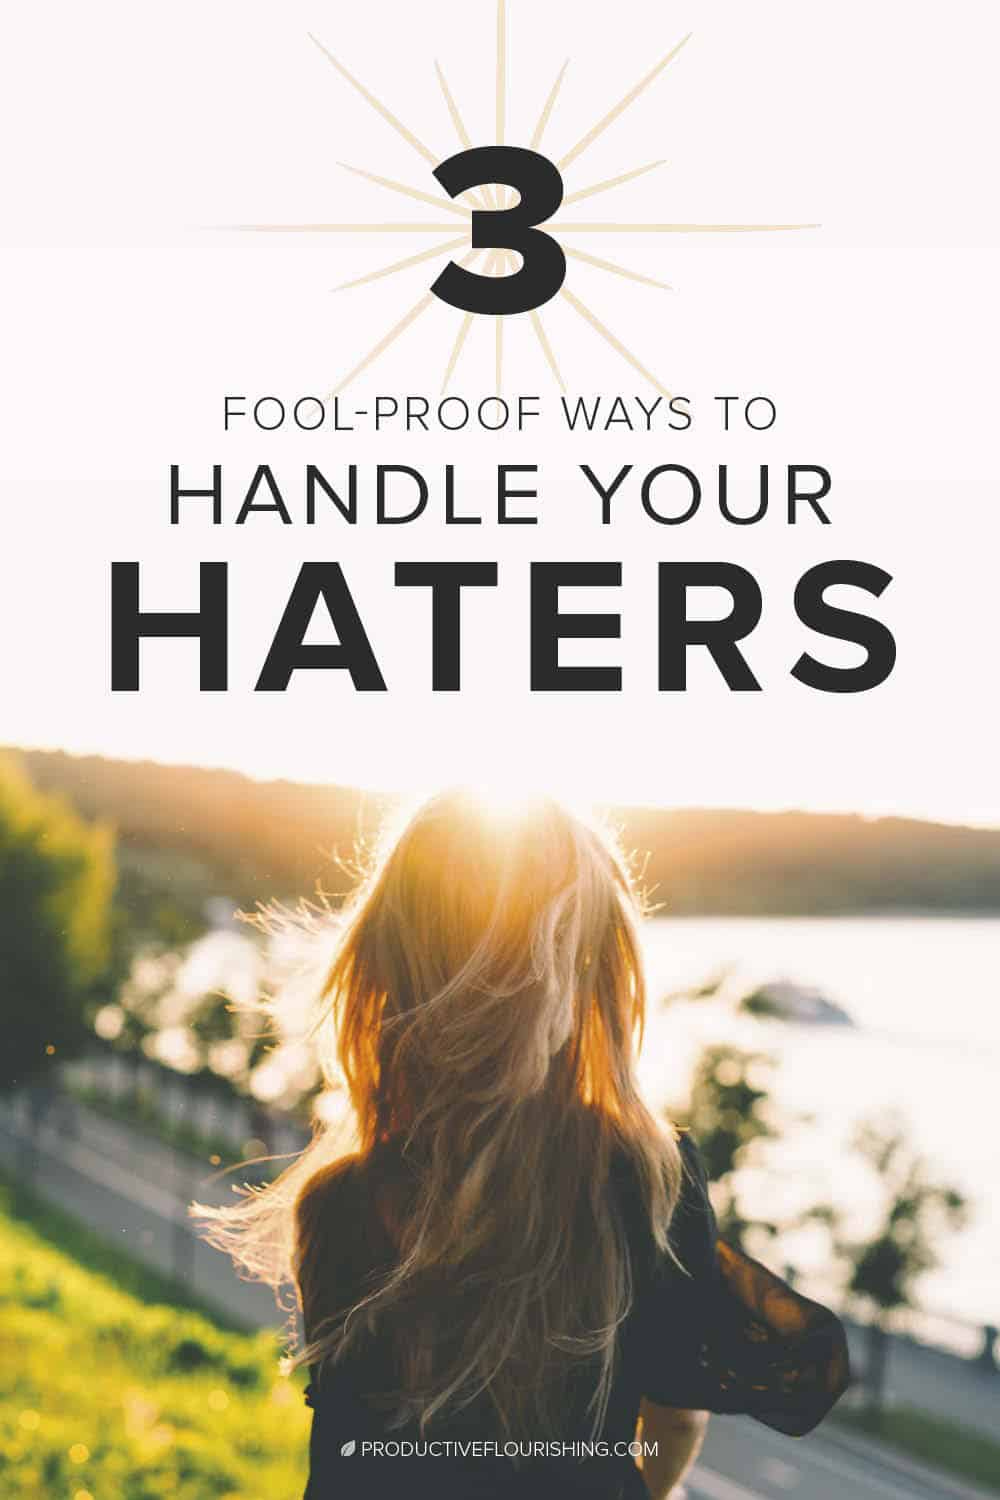 Learn these three fool-proof ways to handle your haters and develop healthier relationships, habits, and boundaries. #productiveflourishing #entrepreneur #relationships